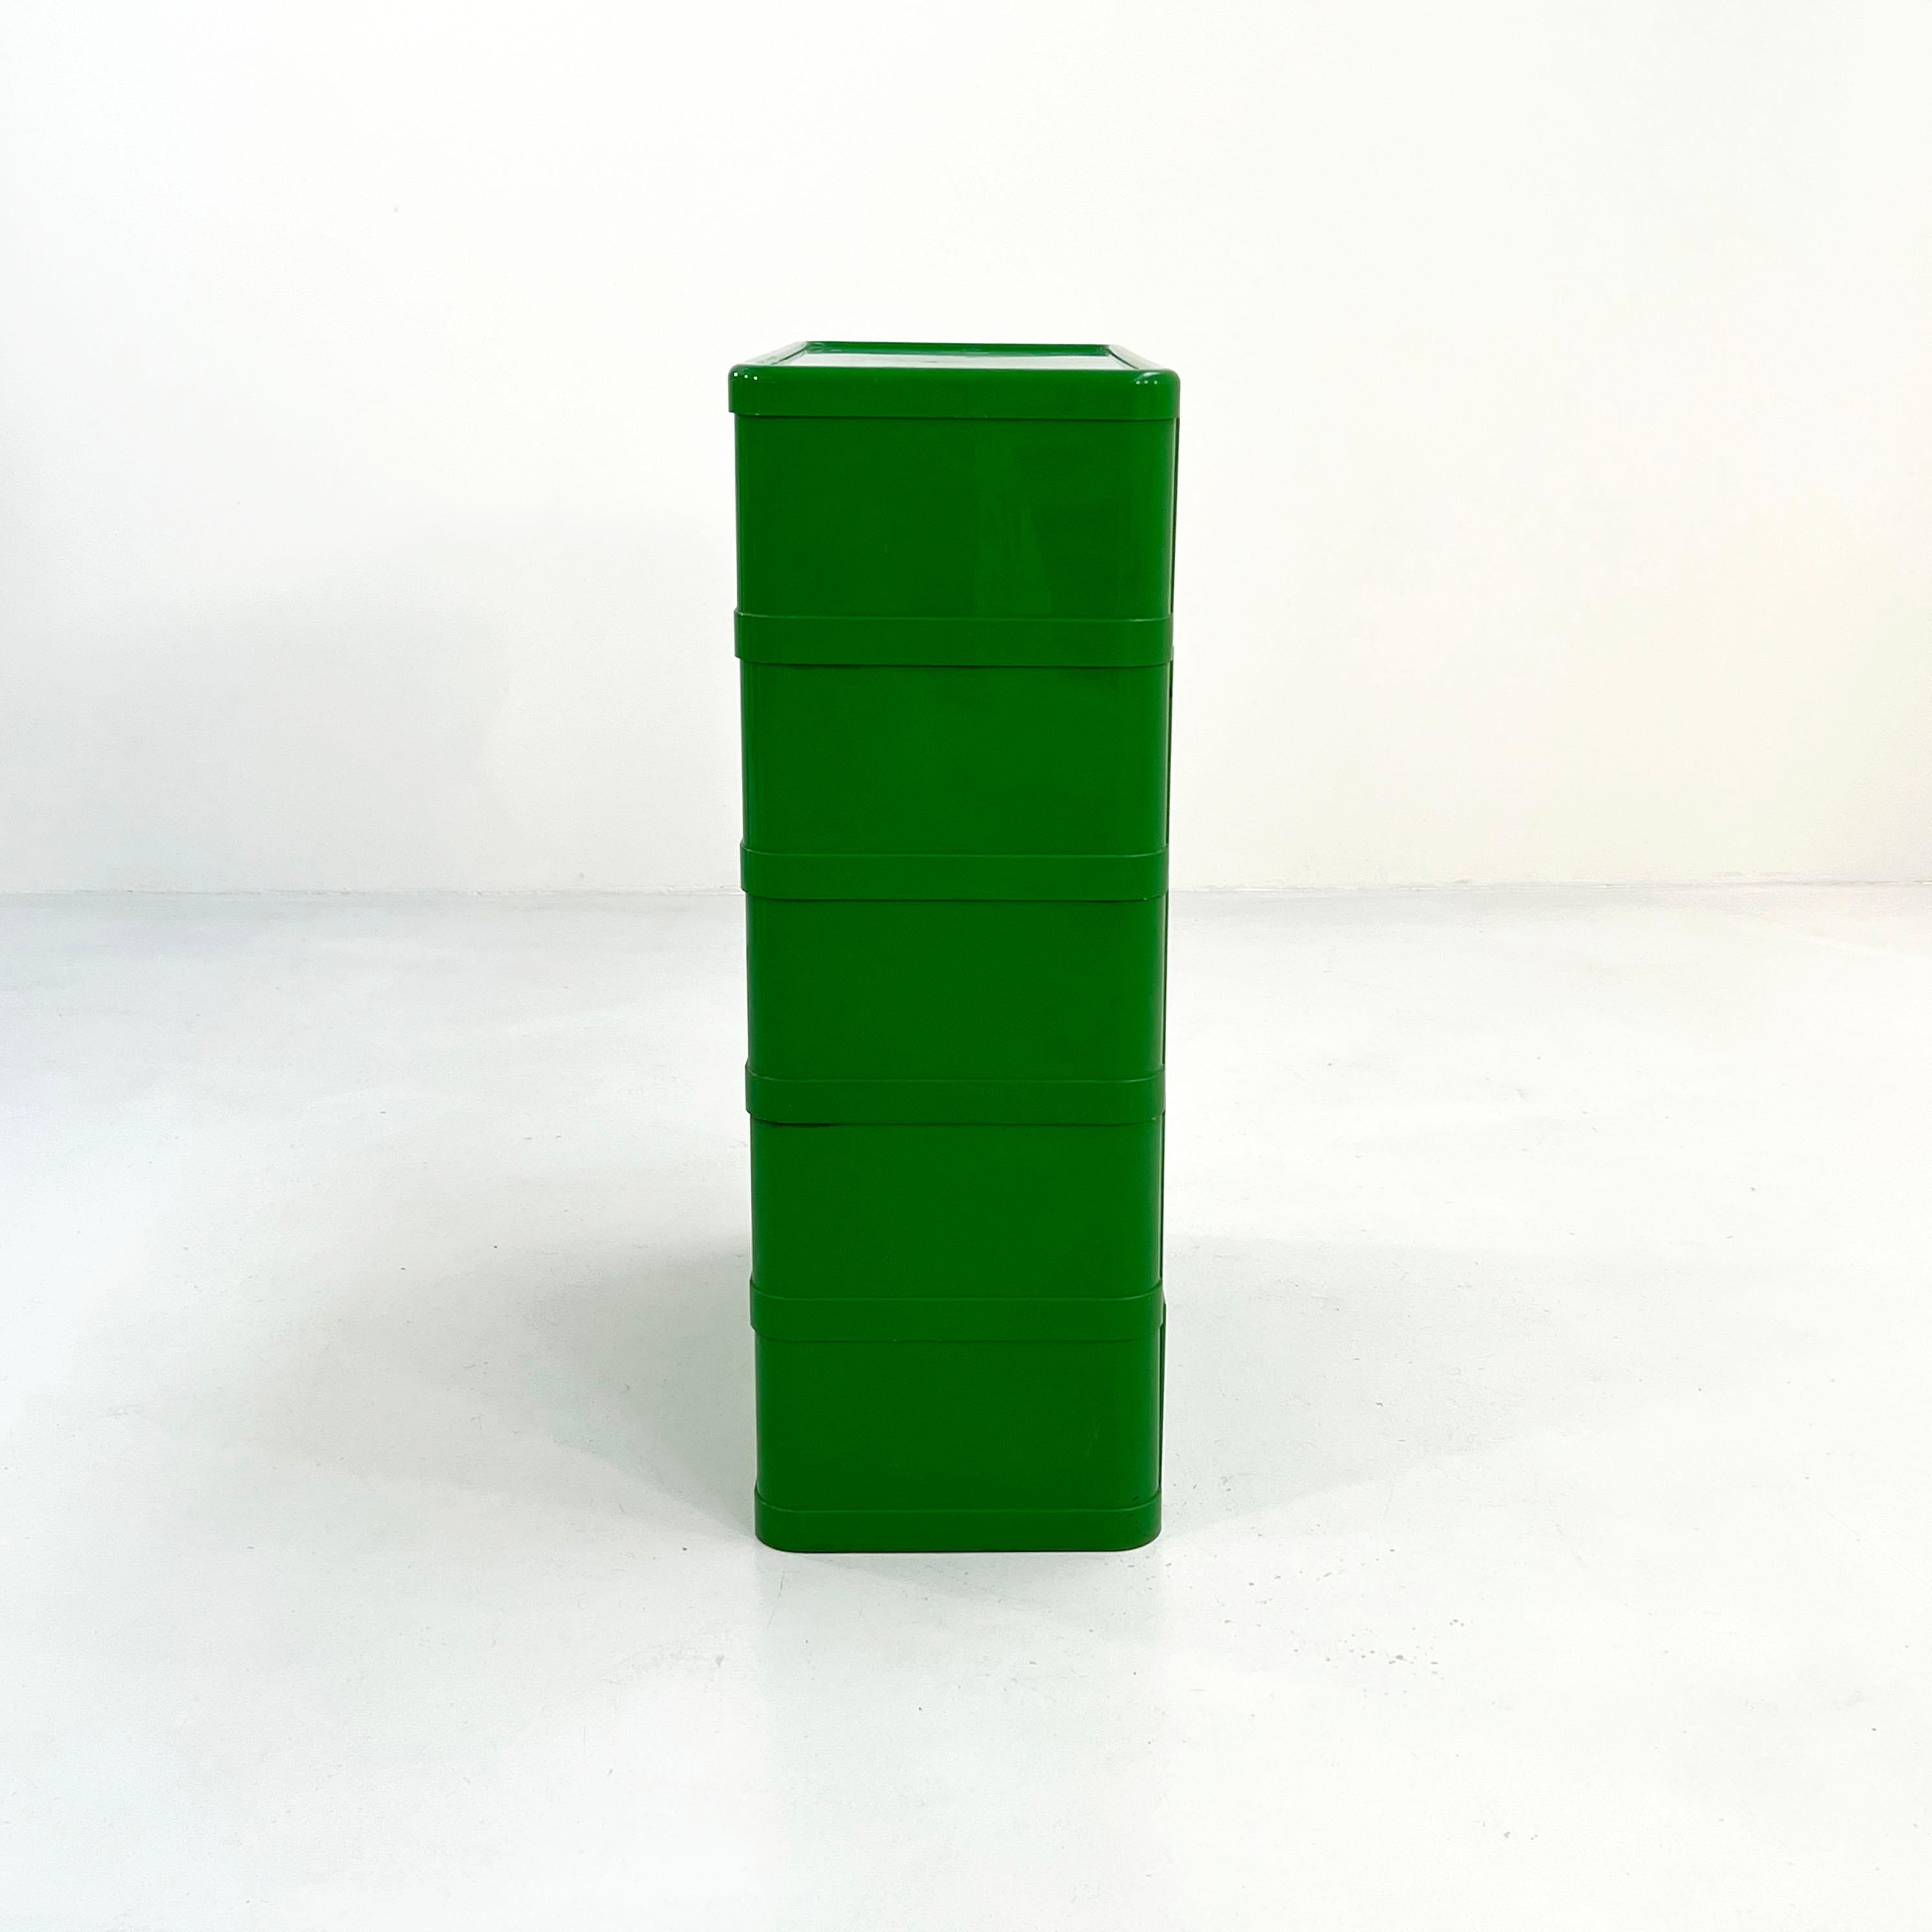 Late 20th Century Green Chest of Drawers Model “4964” by Olaf Von Bohr for Kartell, 1970s